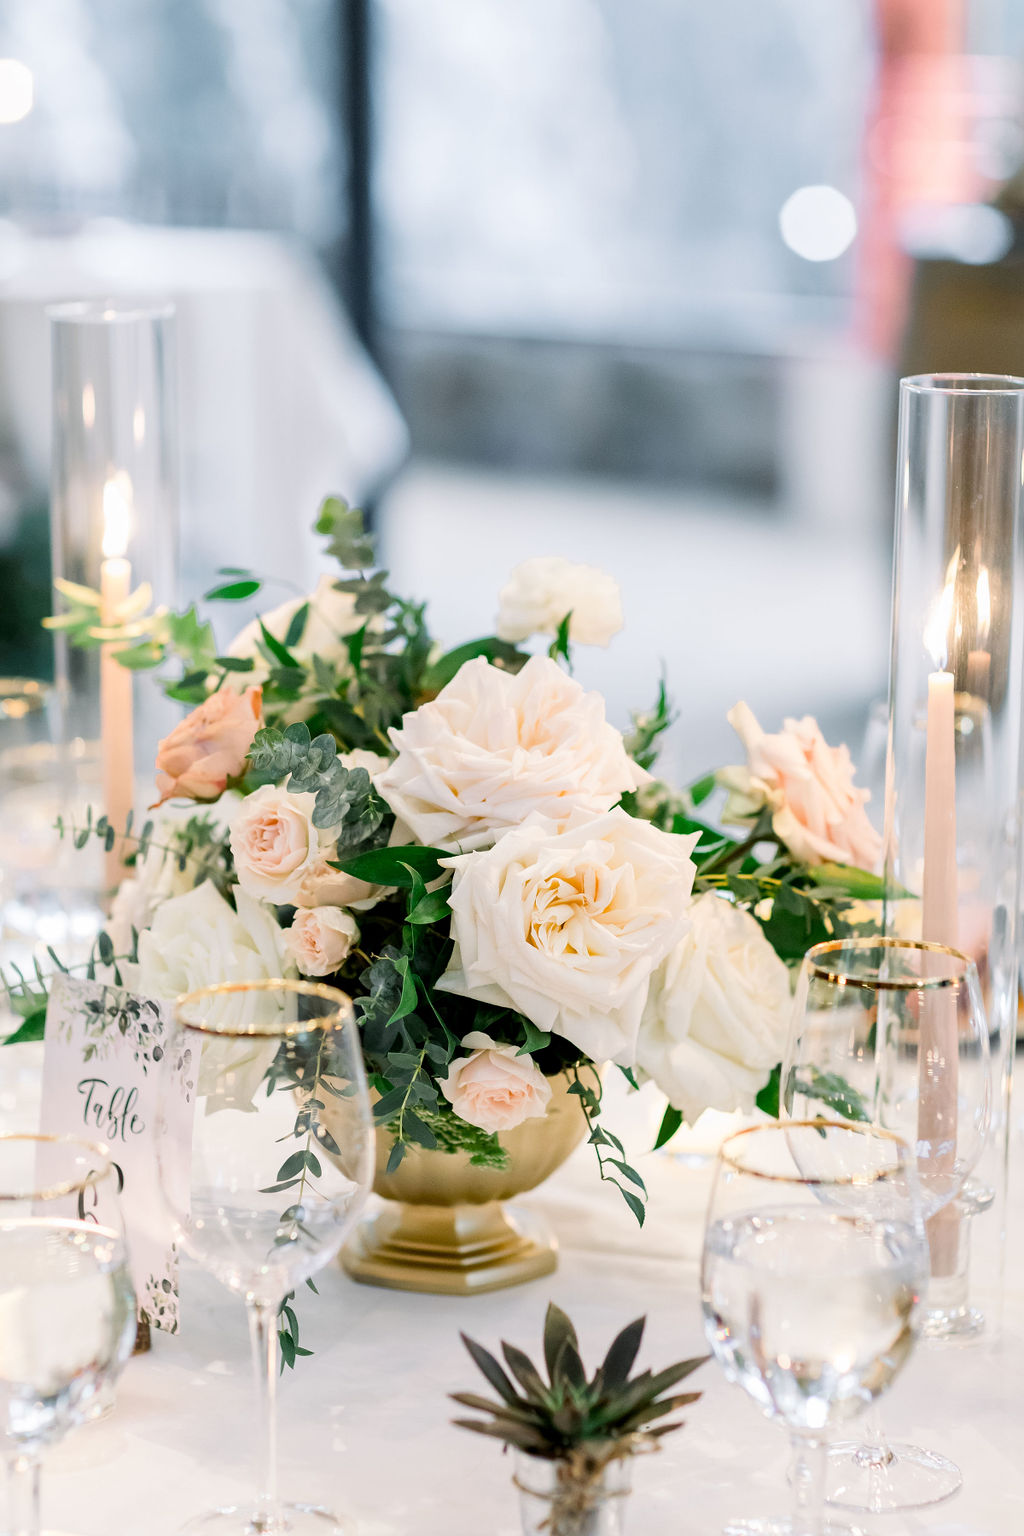 romantic and glamorous wedding reception at the Redwood Room at Calamigos Ranch with pink and white rose centerpiece in gold vase with pink taper candles